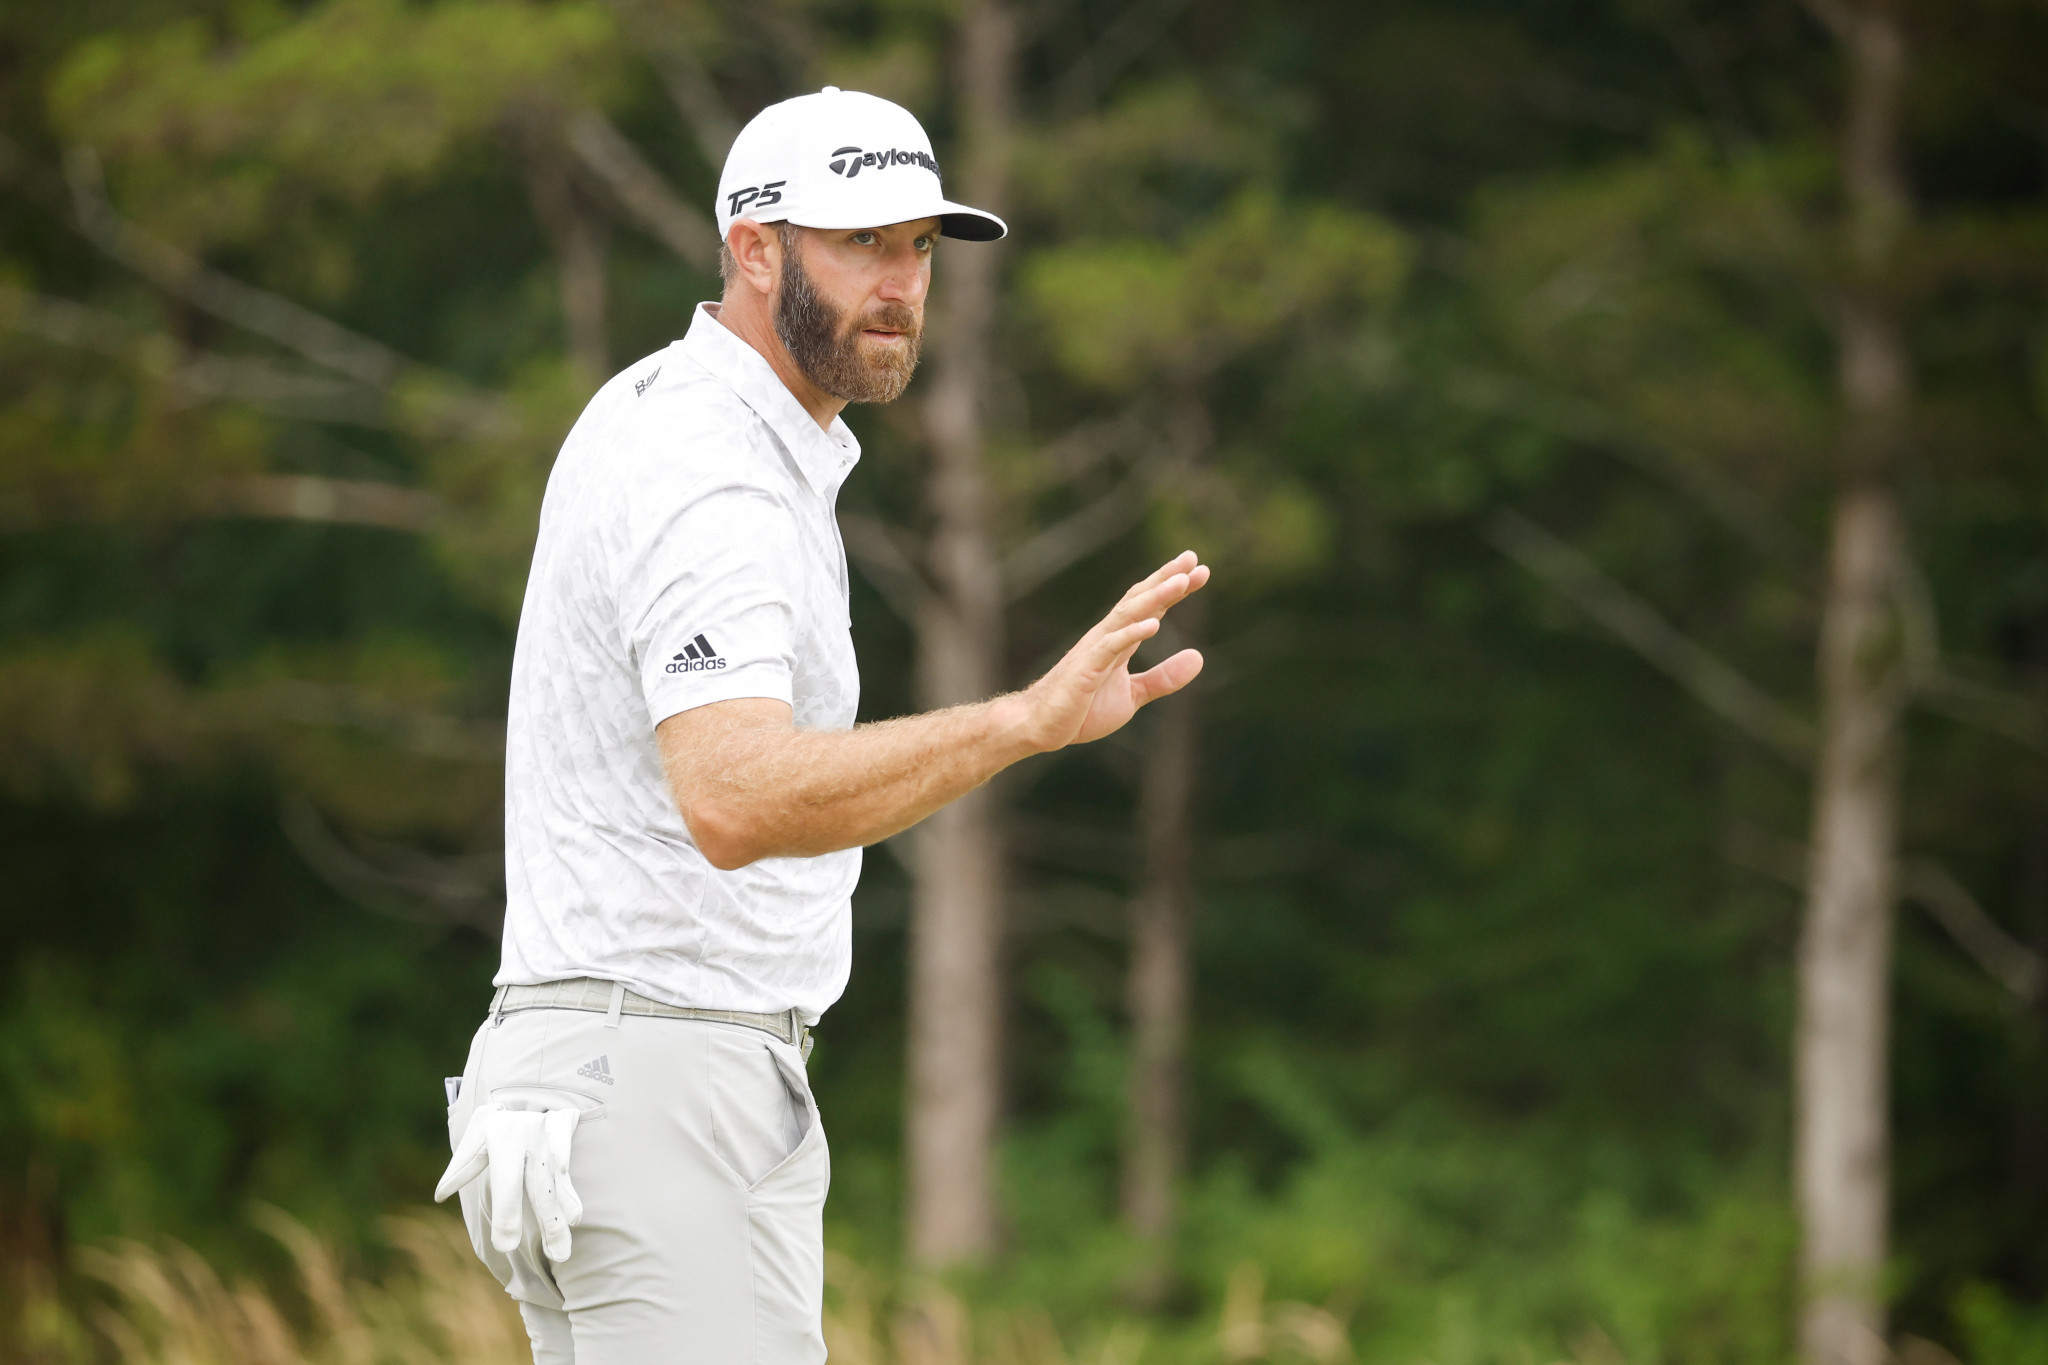 Dustin Johnson is one of many golfers to be banned from the PGA Tour after joining the Saudi-backed LIV Golf series ©Getty Images